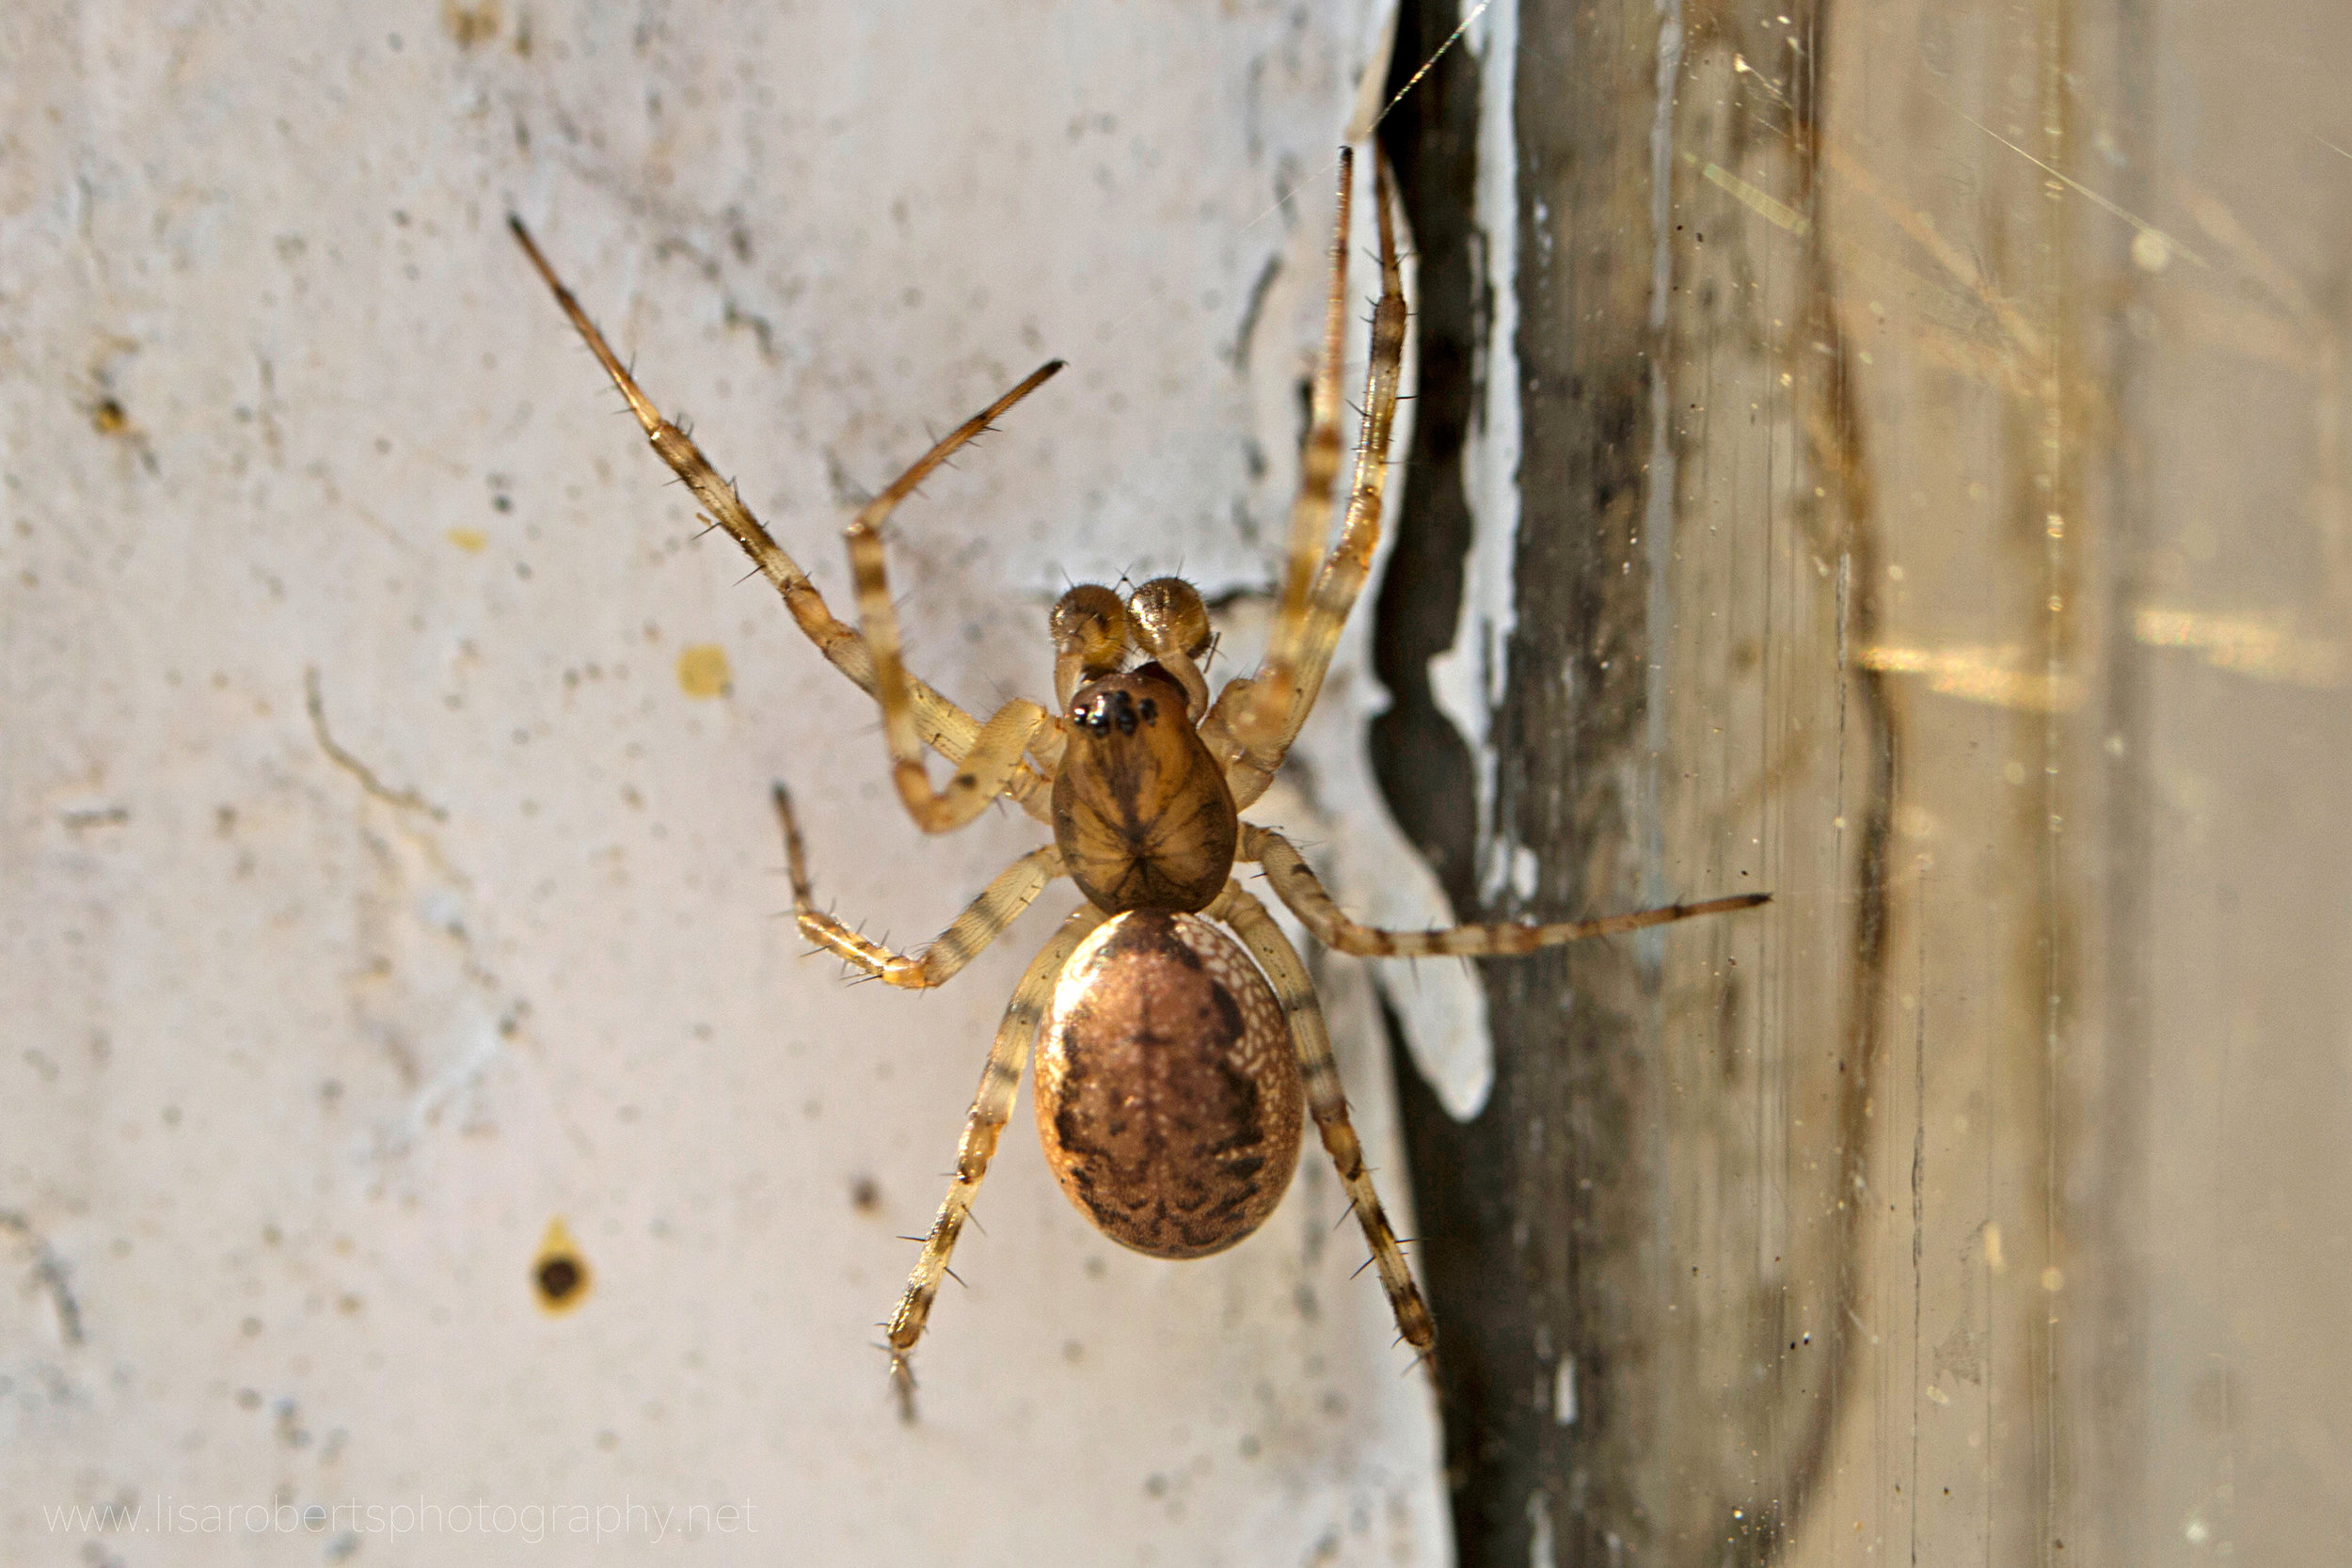  Lace weaver Spider 